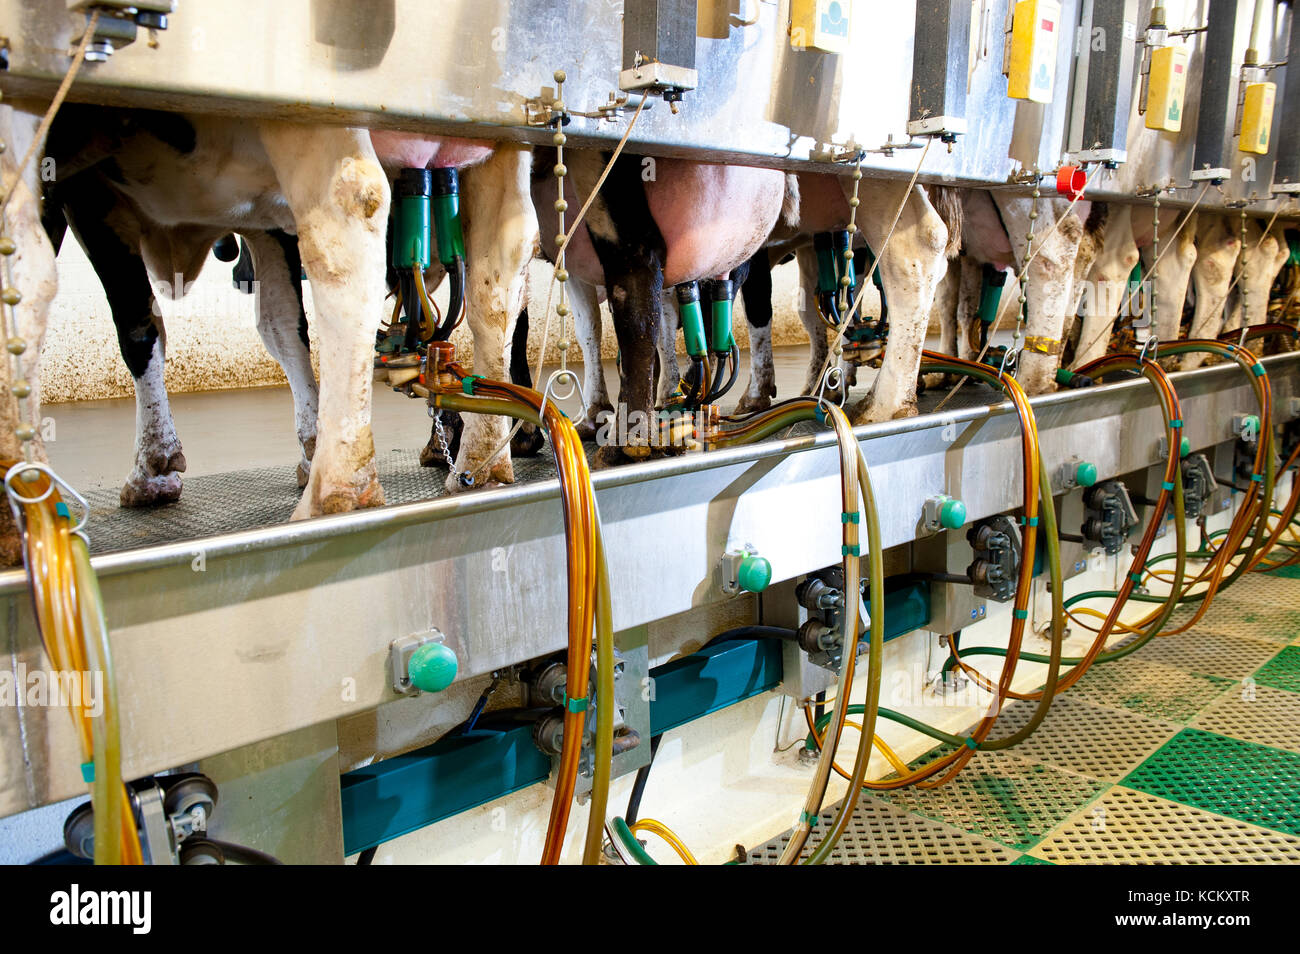 MILKING COWS AT AUTOMATED MILKING PARLOR Stock Photo